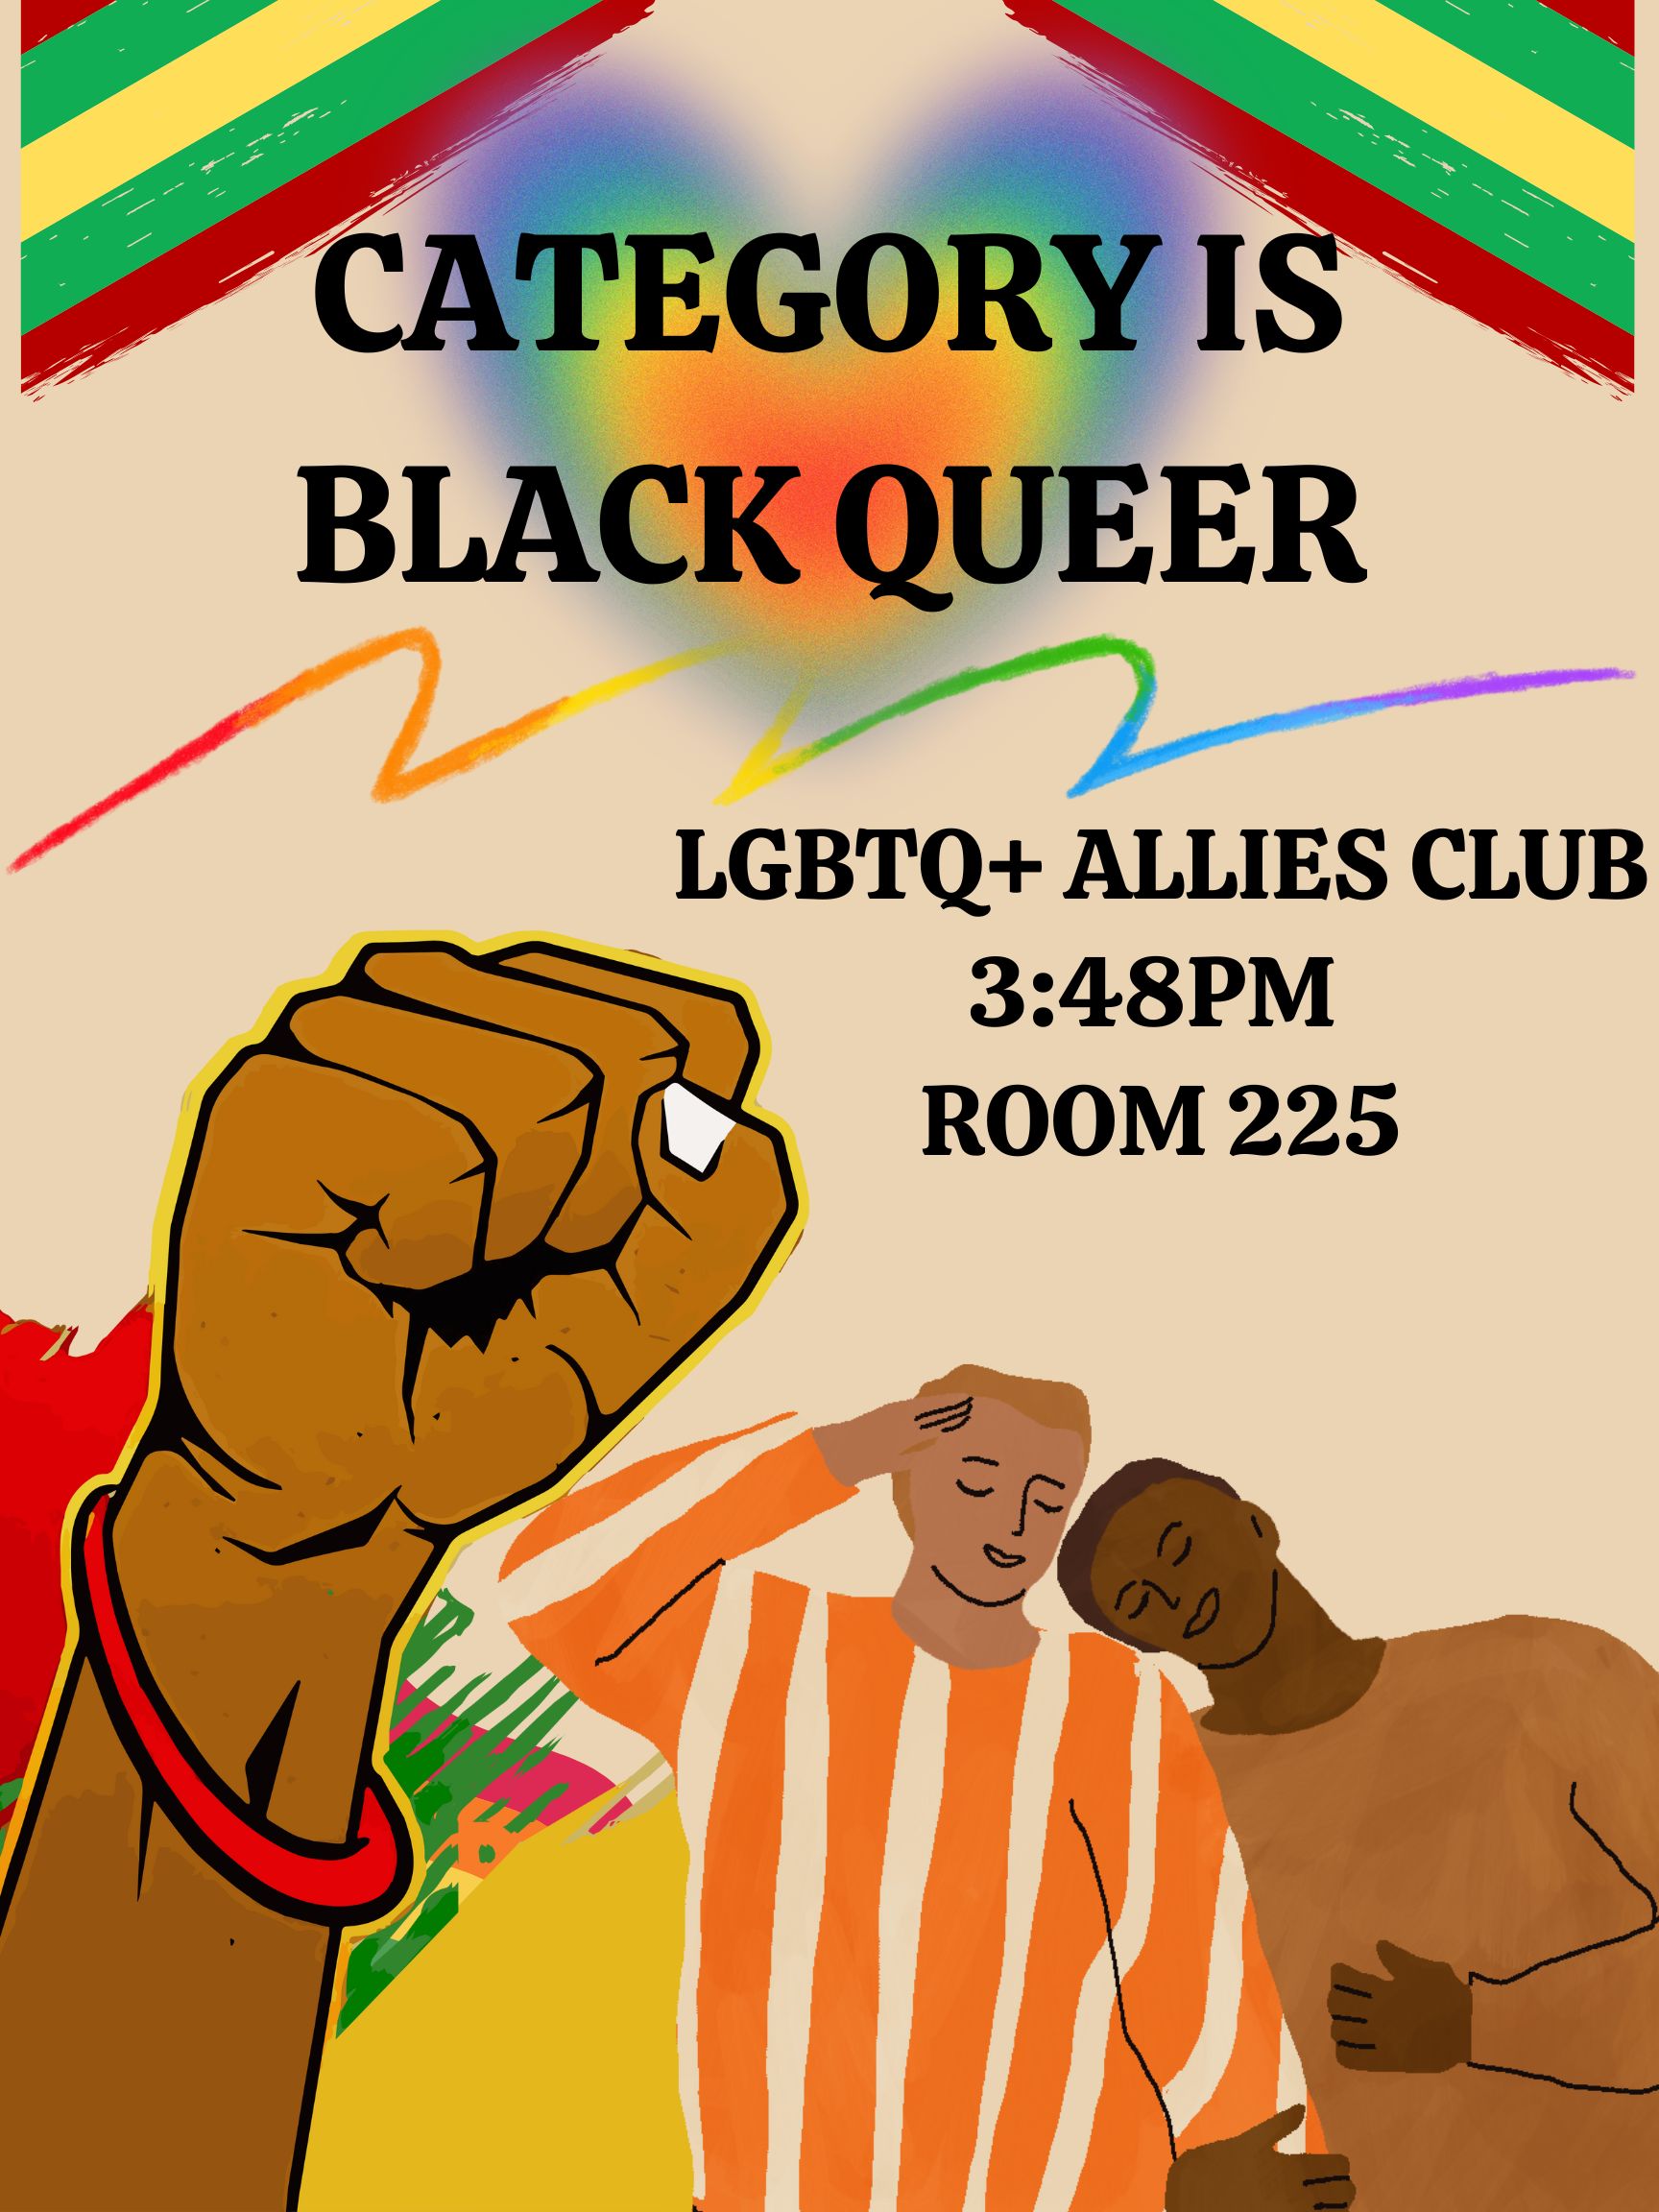 The graphic is a poster for an ITW David Speer Academy Pride and Ally Club event. At the top is the title of the event which is "Category is Black Queer". Strips of the pan-African colors cover both top corners of the poster. Behind the title is a rainbow heart and underneath the heart is a rainbow crayon scribble. Underneath the scribble is the information for the event. The text says "LGBTQ+ Allies Club, 3:48 PM, Room 225". At the bottom of the poster is a Black fist raised in protest and a drawing of two Black boys leaning against each other.